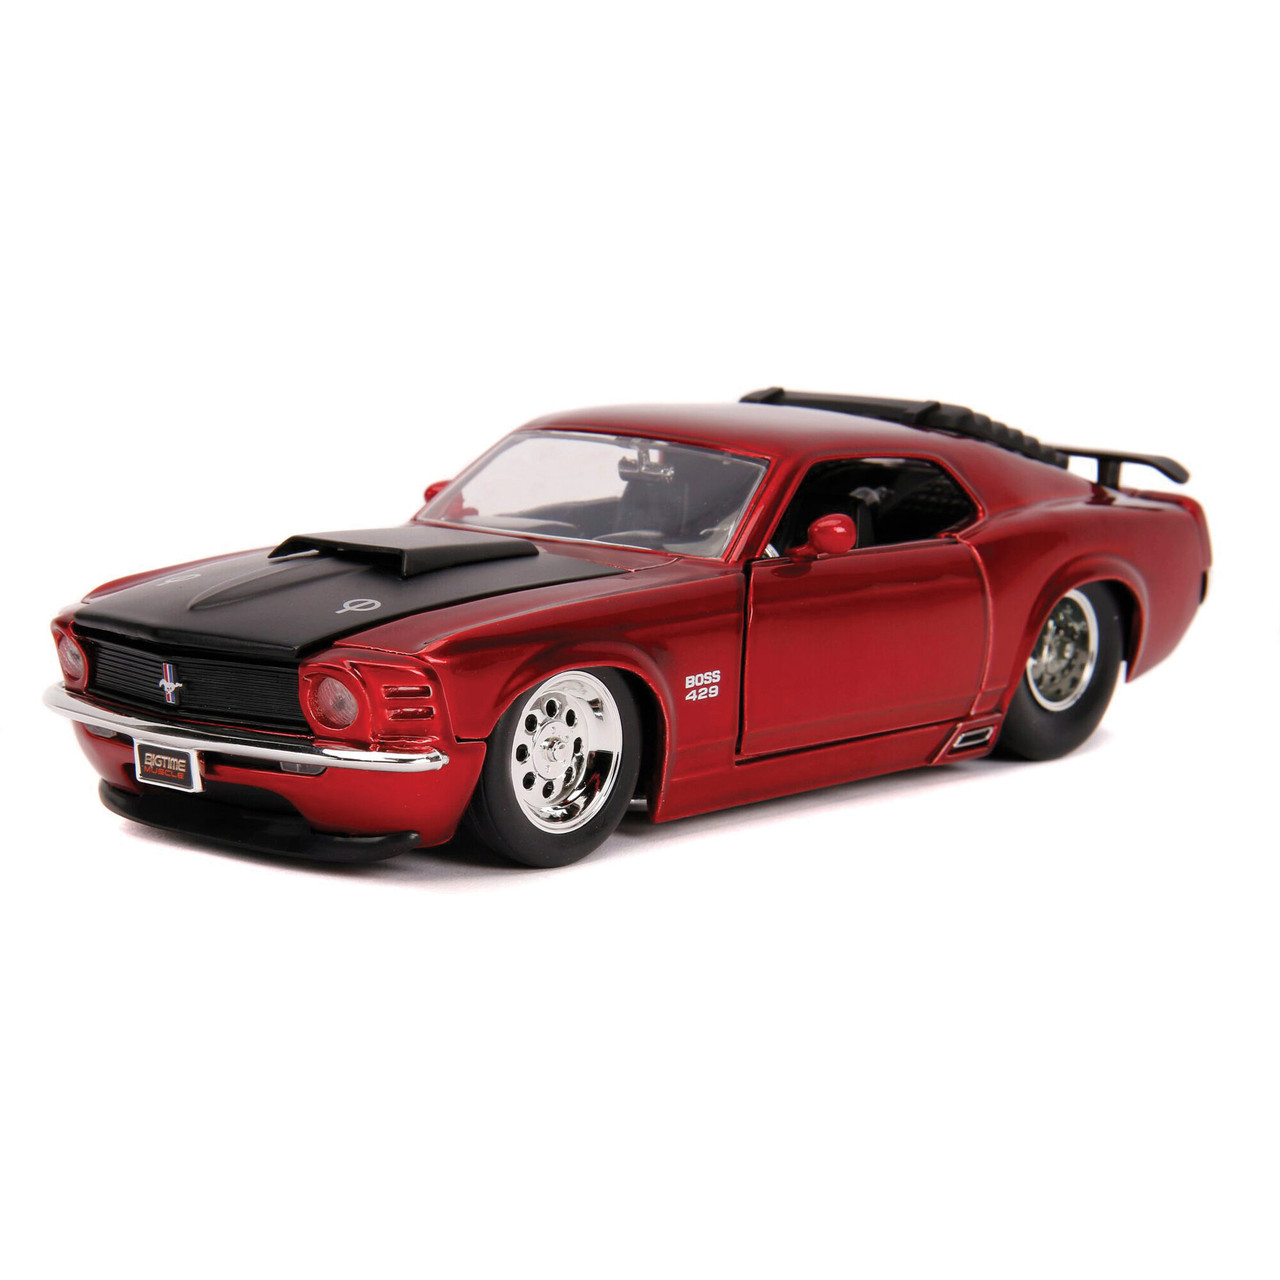 1970 FORD MUSTANG BOSS 429 - Red 1:24 Scale Diecast Model Car by Jada Toys